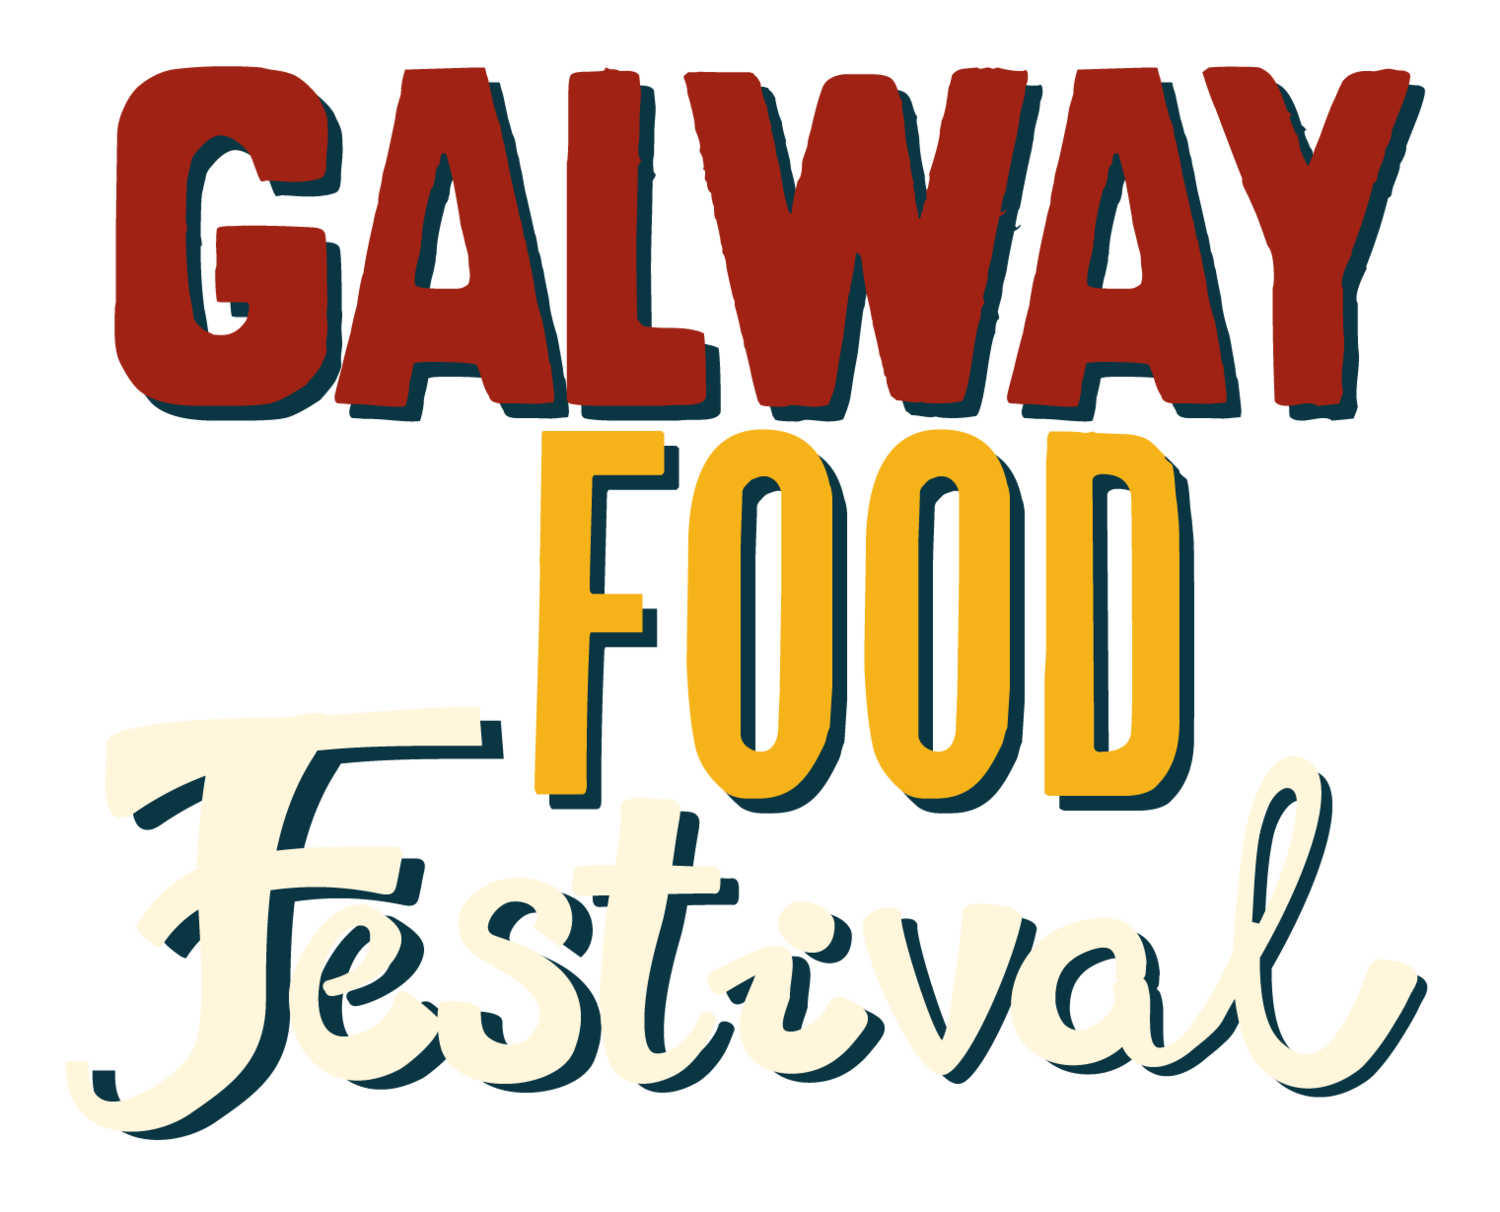 Galway Food Festival event in Galway, Ireland.